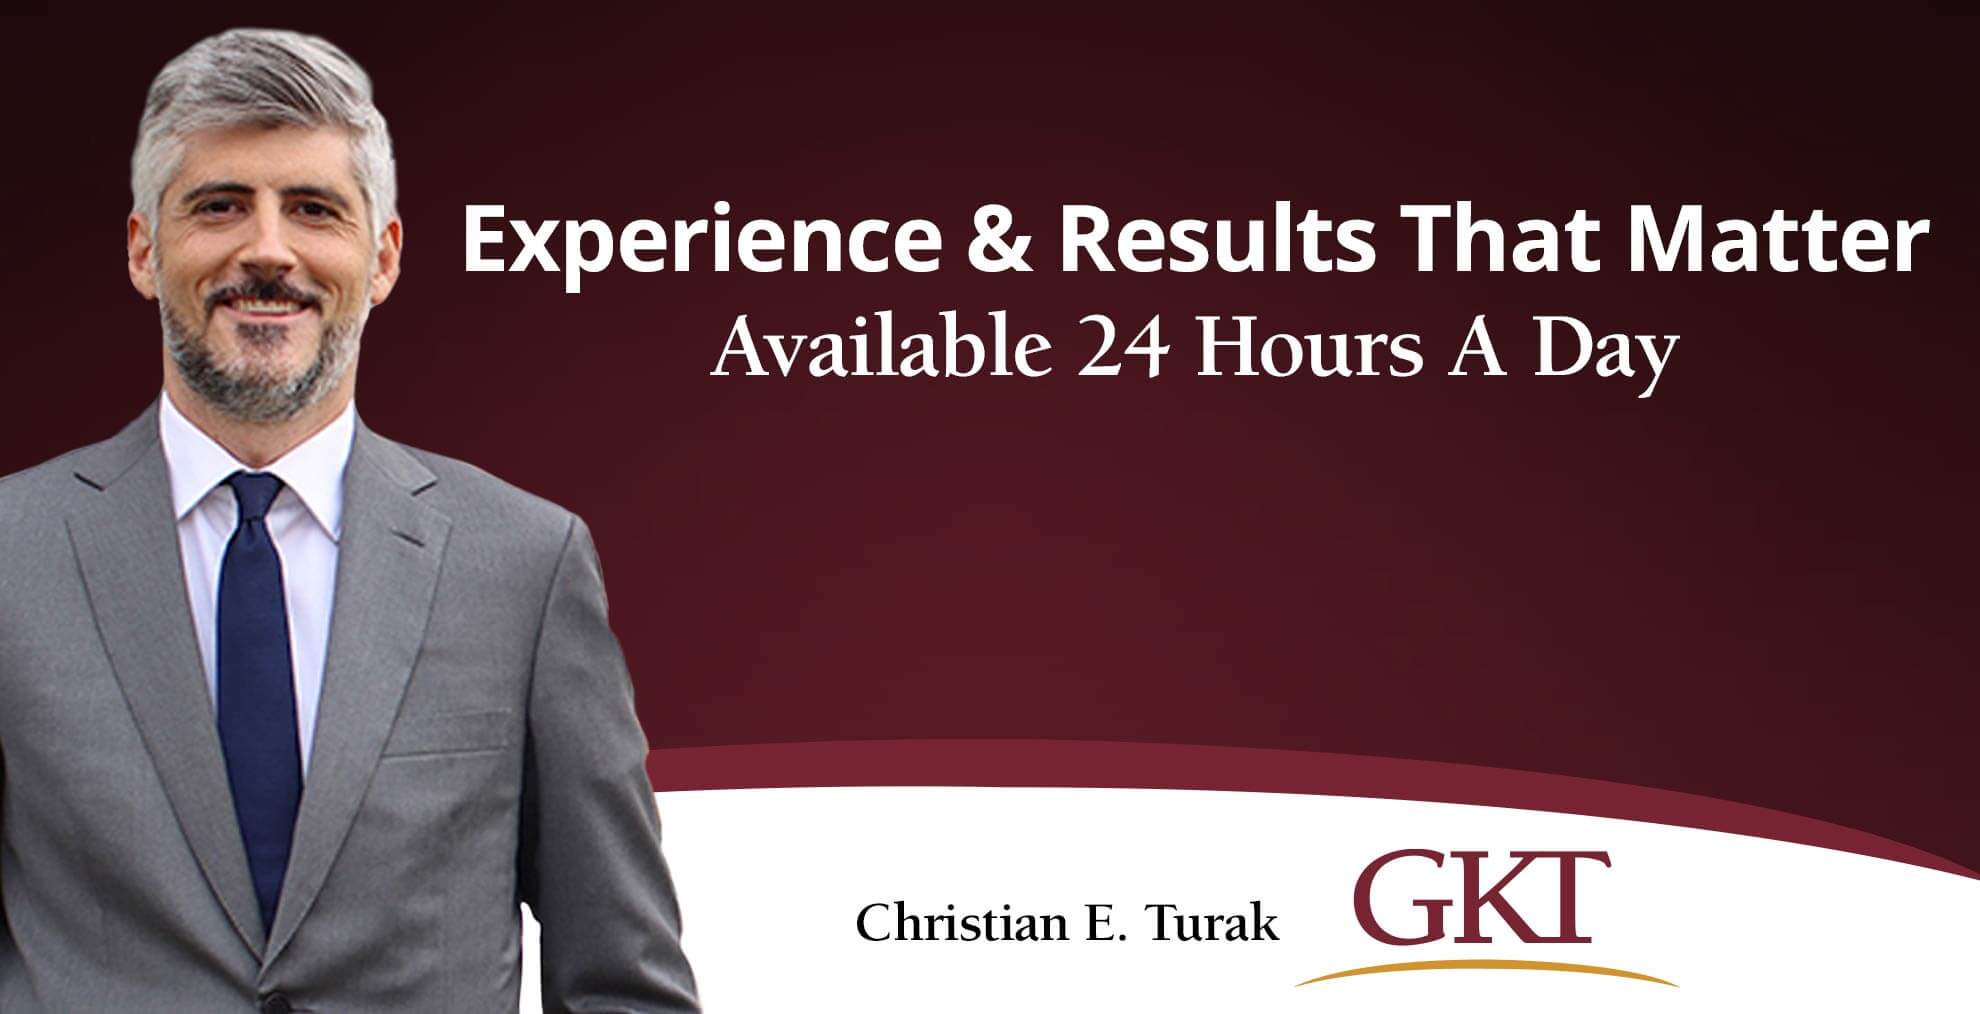 Experience and Results That Matter Available 24 Hours a Day - Christian E. Turak - GKT